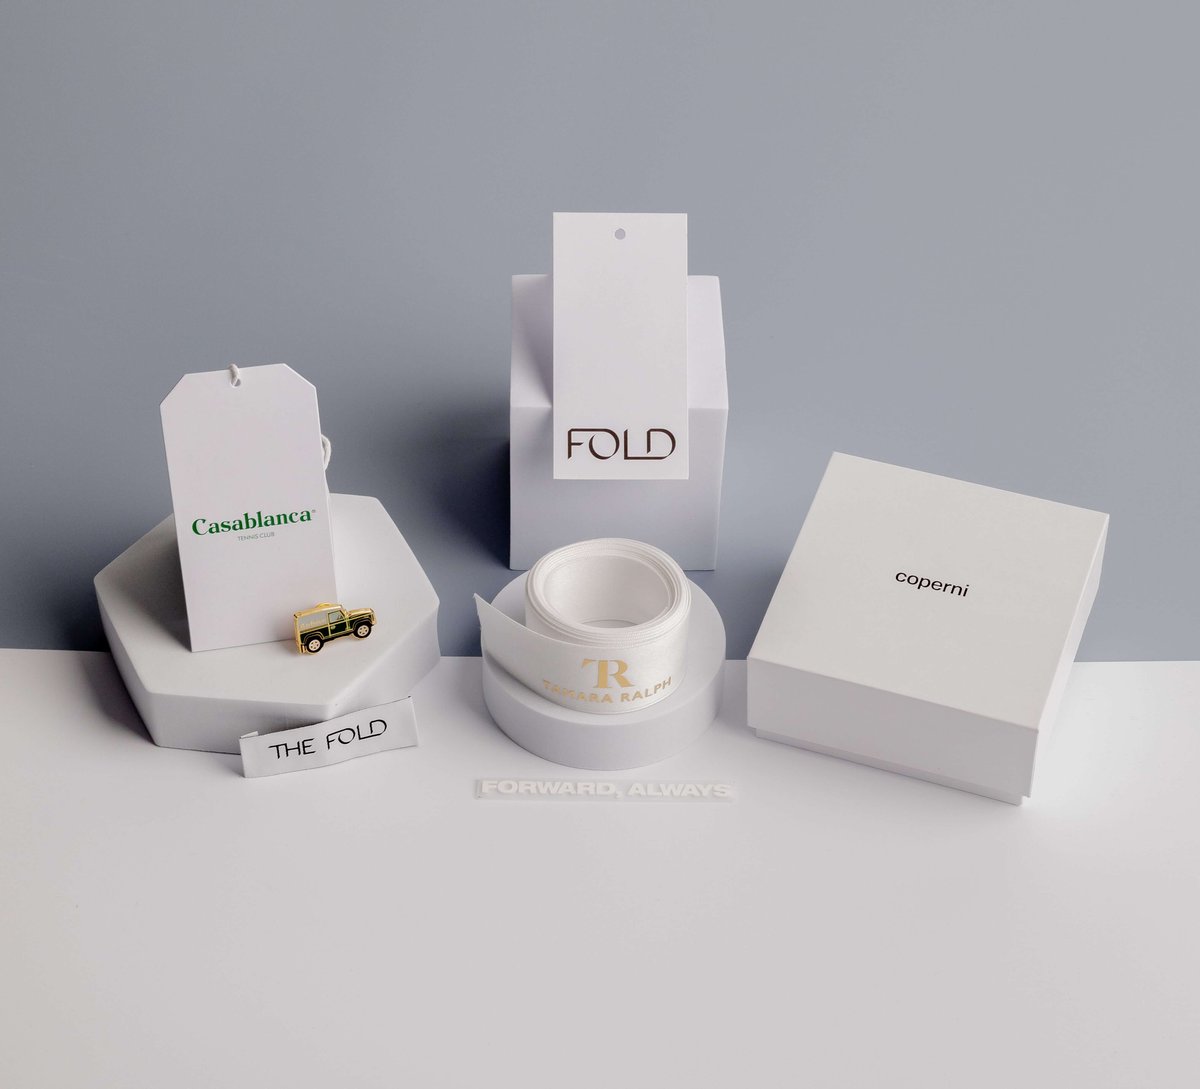 A range of labels and products